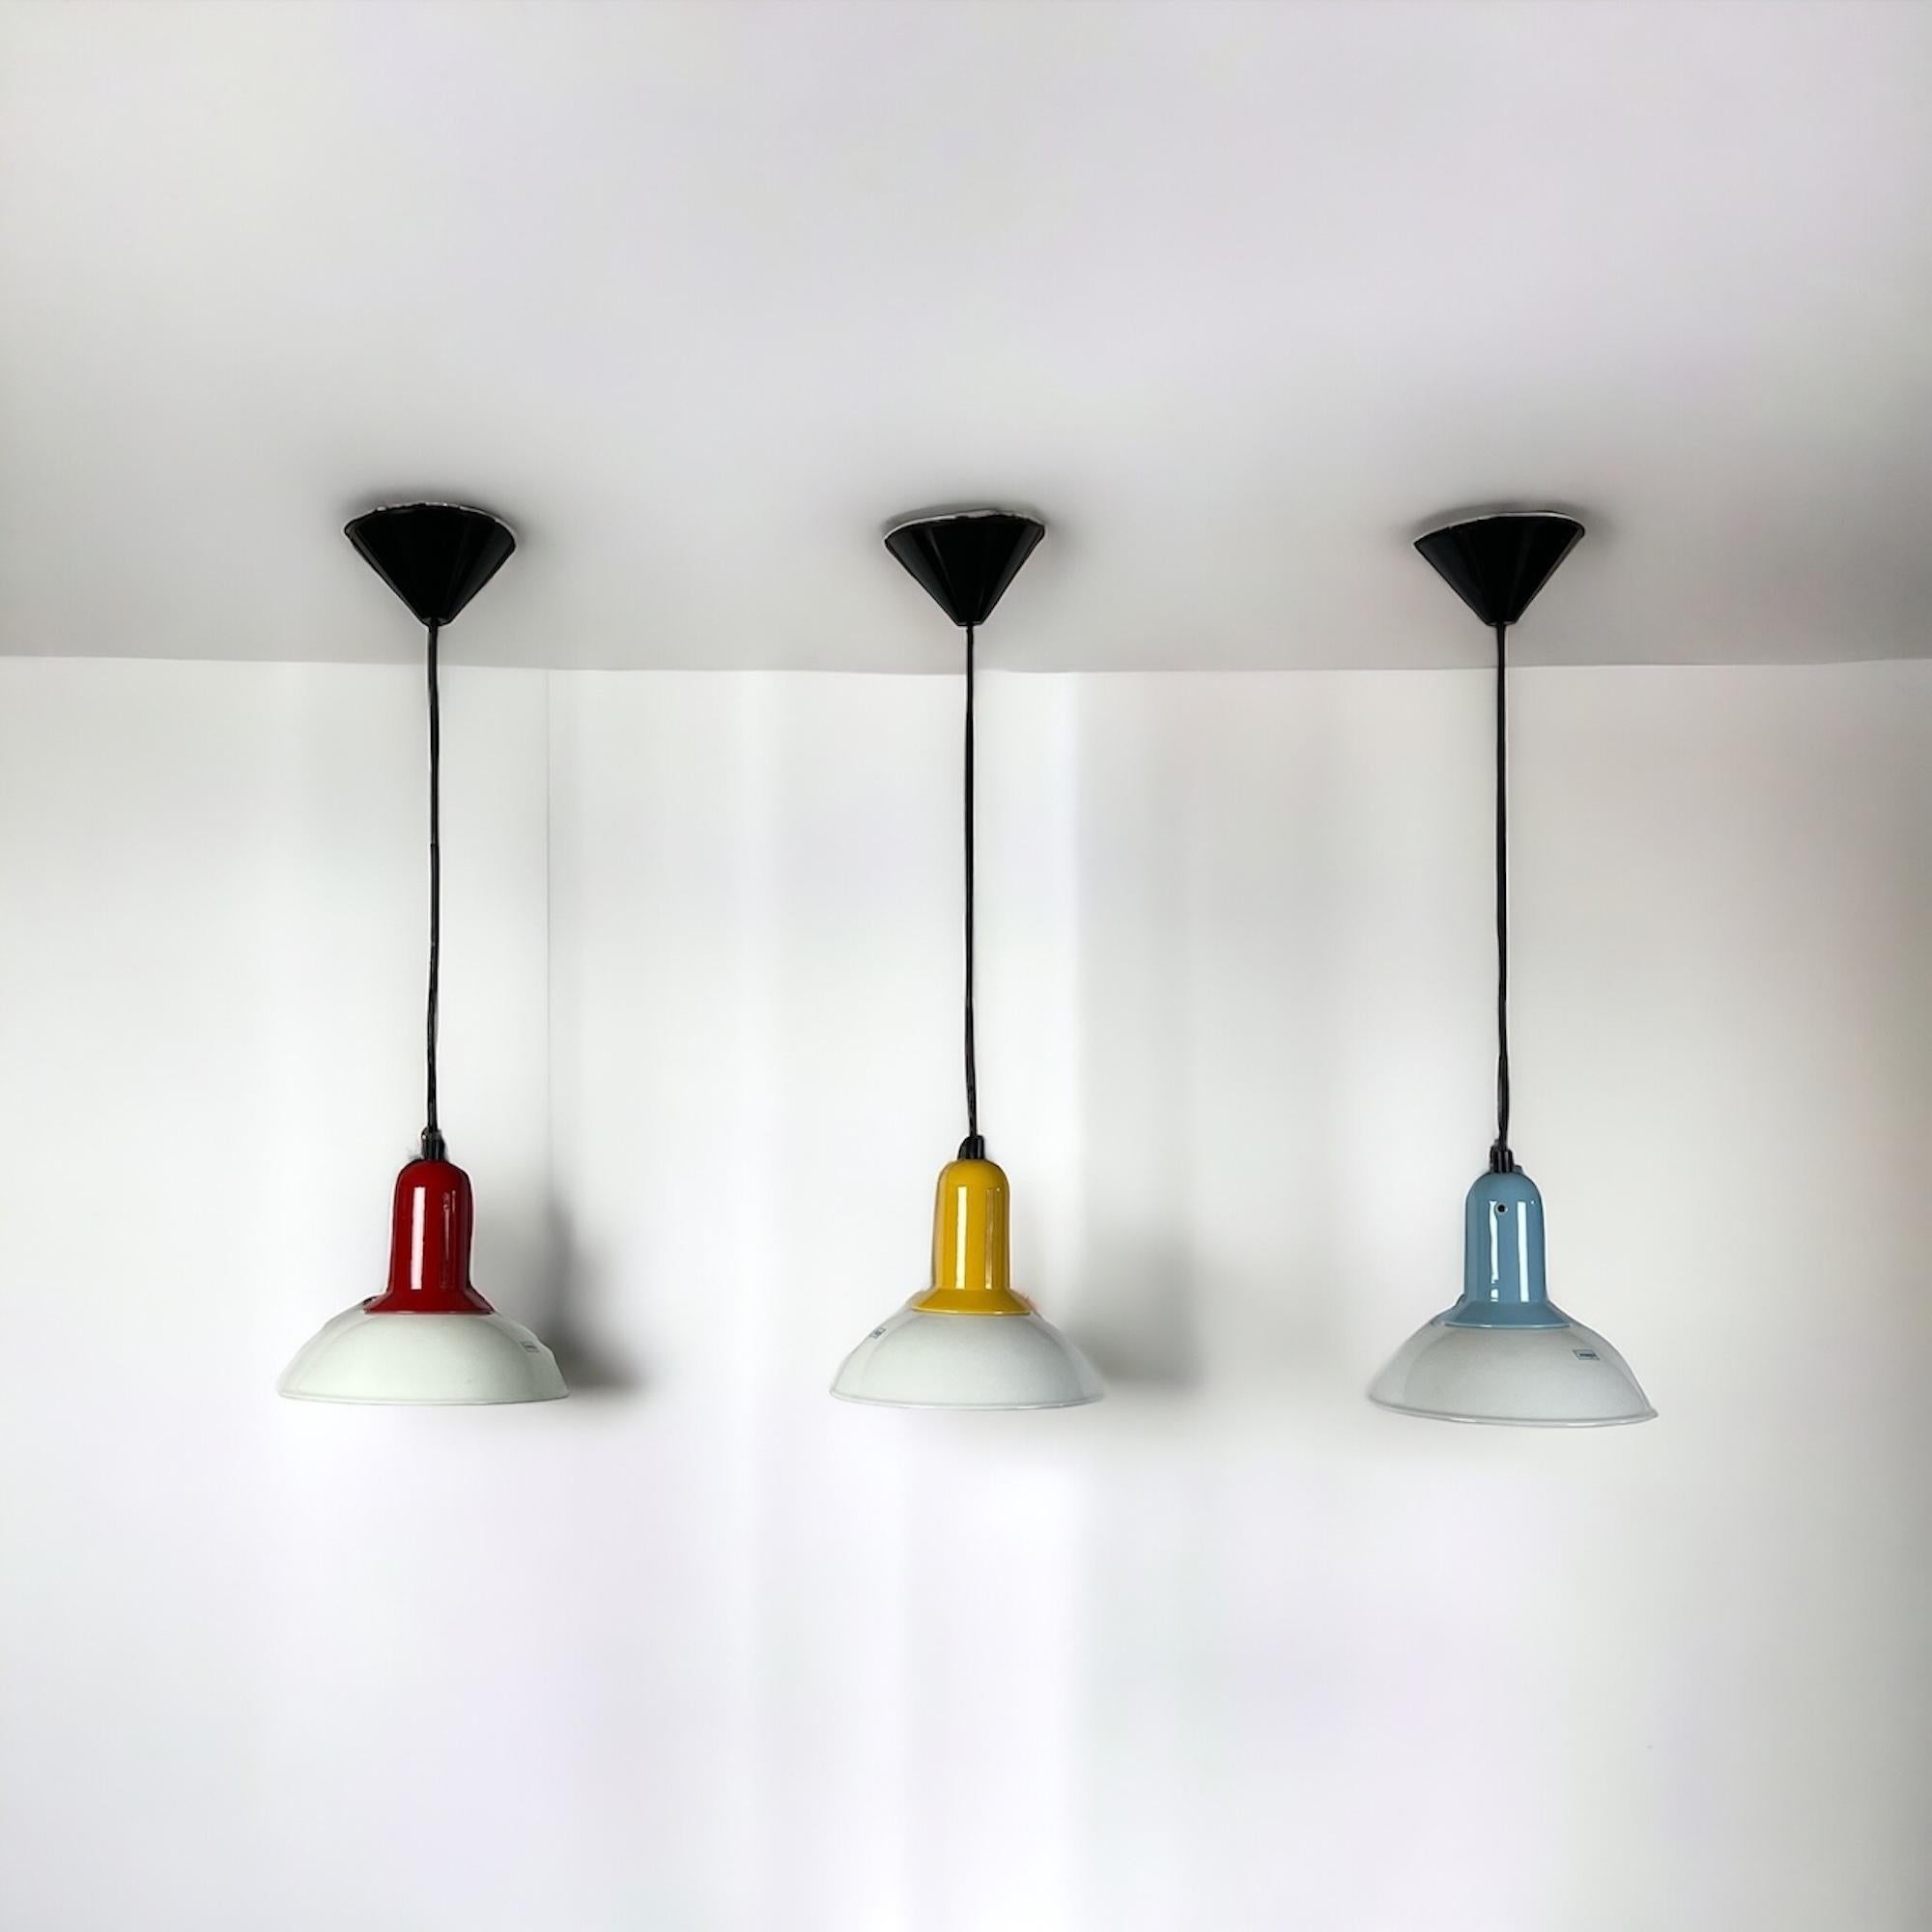 Minimalist Vintage 80s Ceramic Lamps Set by Imago Italy - New Old Stock with Vibrant Hues For Sale